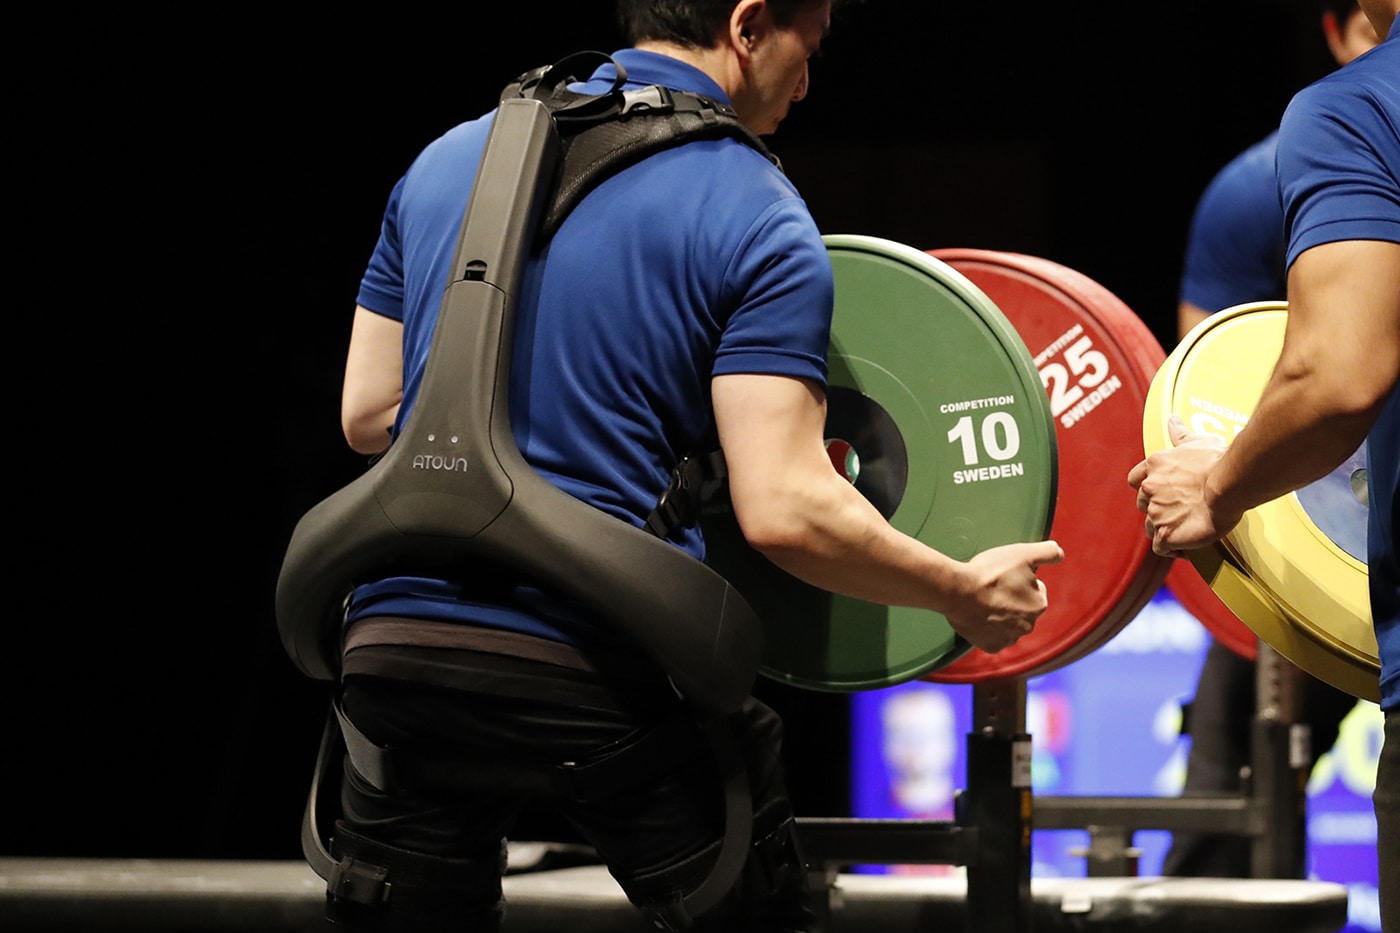 Power assist suit used at World Para Powerlifting (WPPO) Events